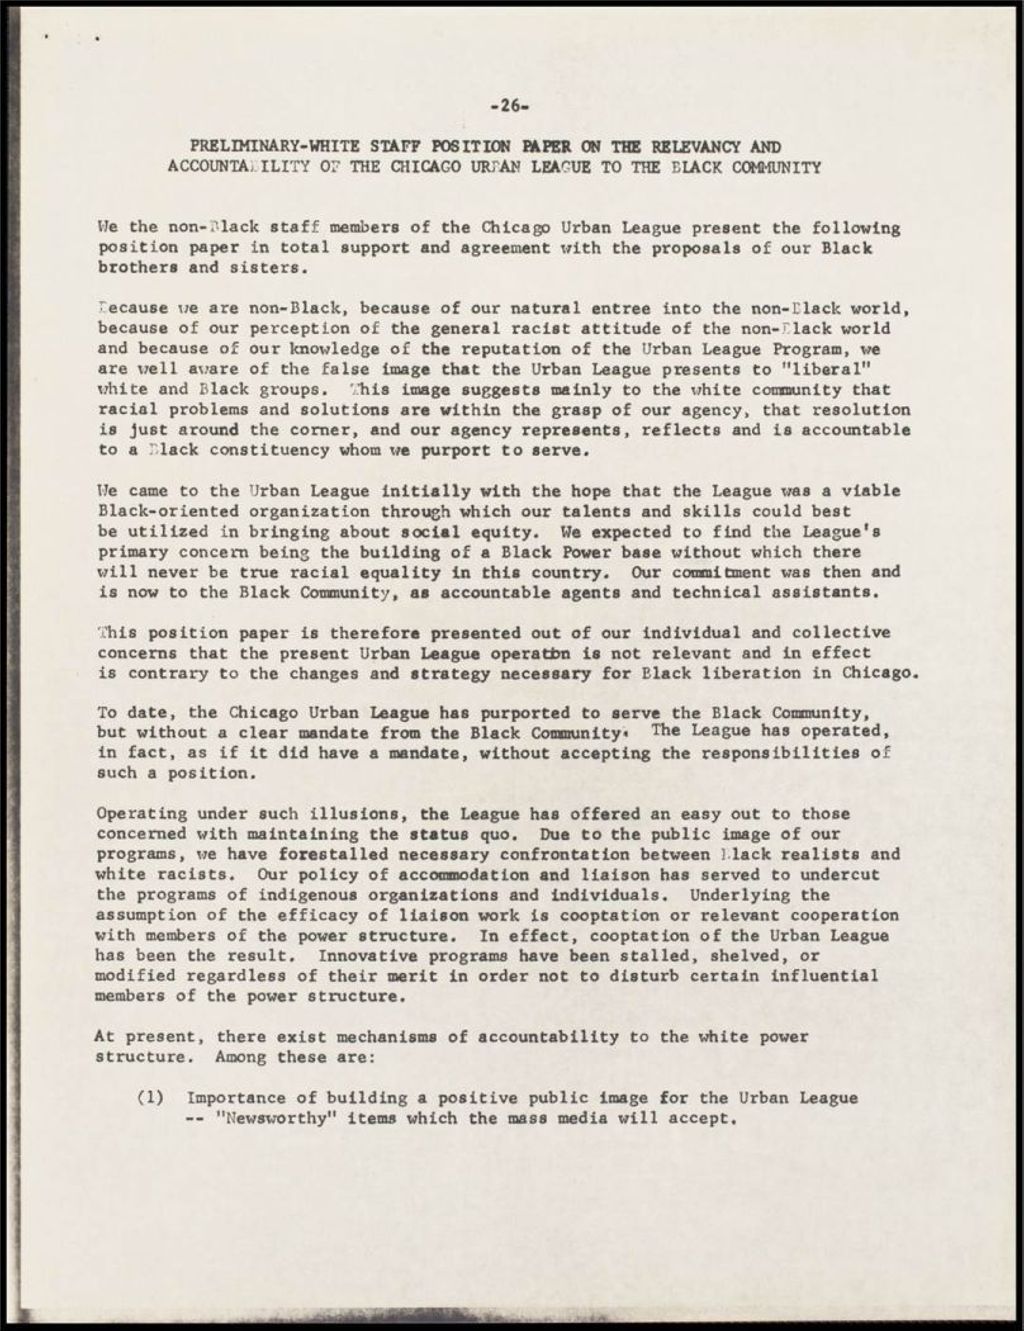 Miniature of Relevancy and Accountability of the CUL to the Black Community, 1968 (Folder III-2483)